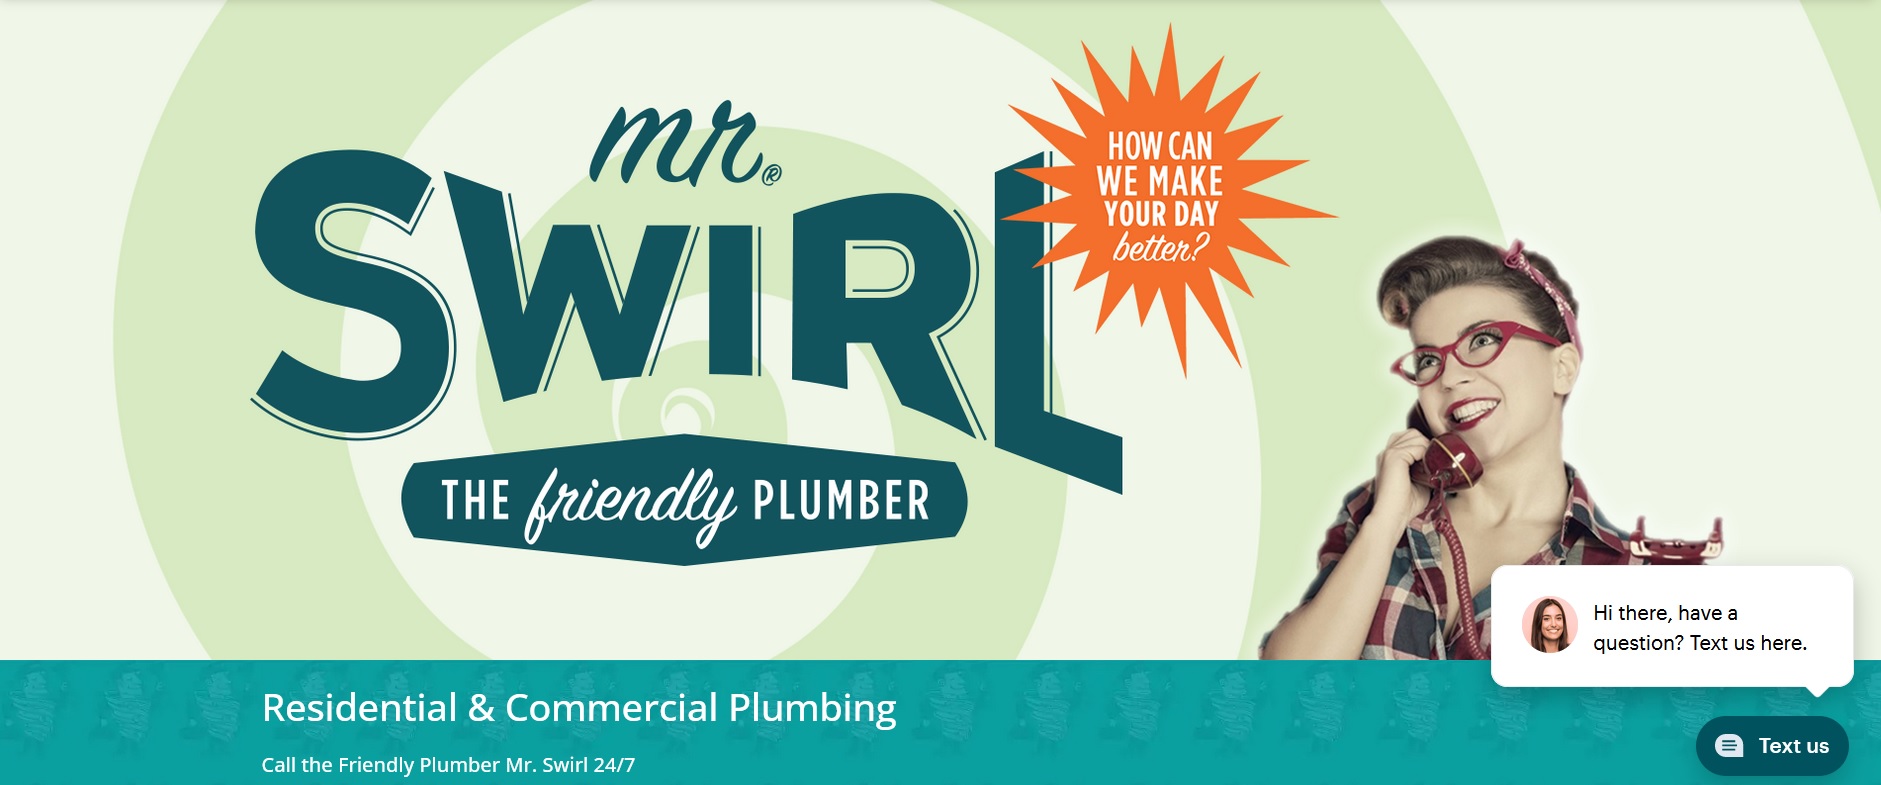 A 1950s style add for Mr Swirl, the friendly plumber.